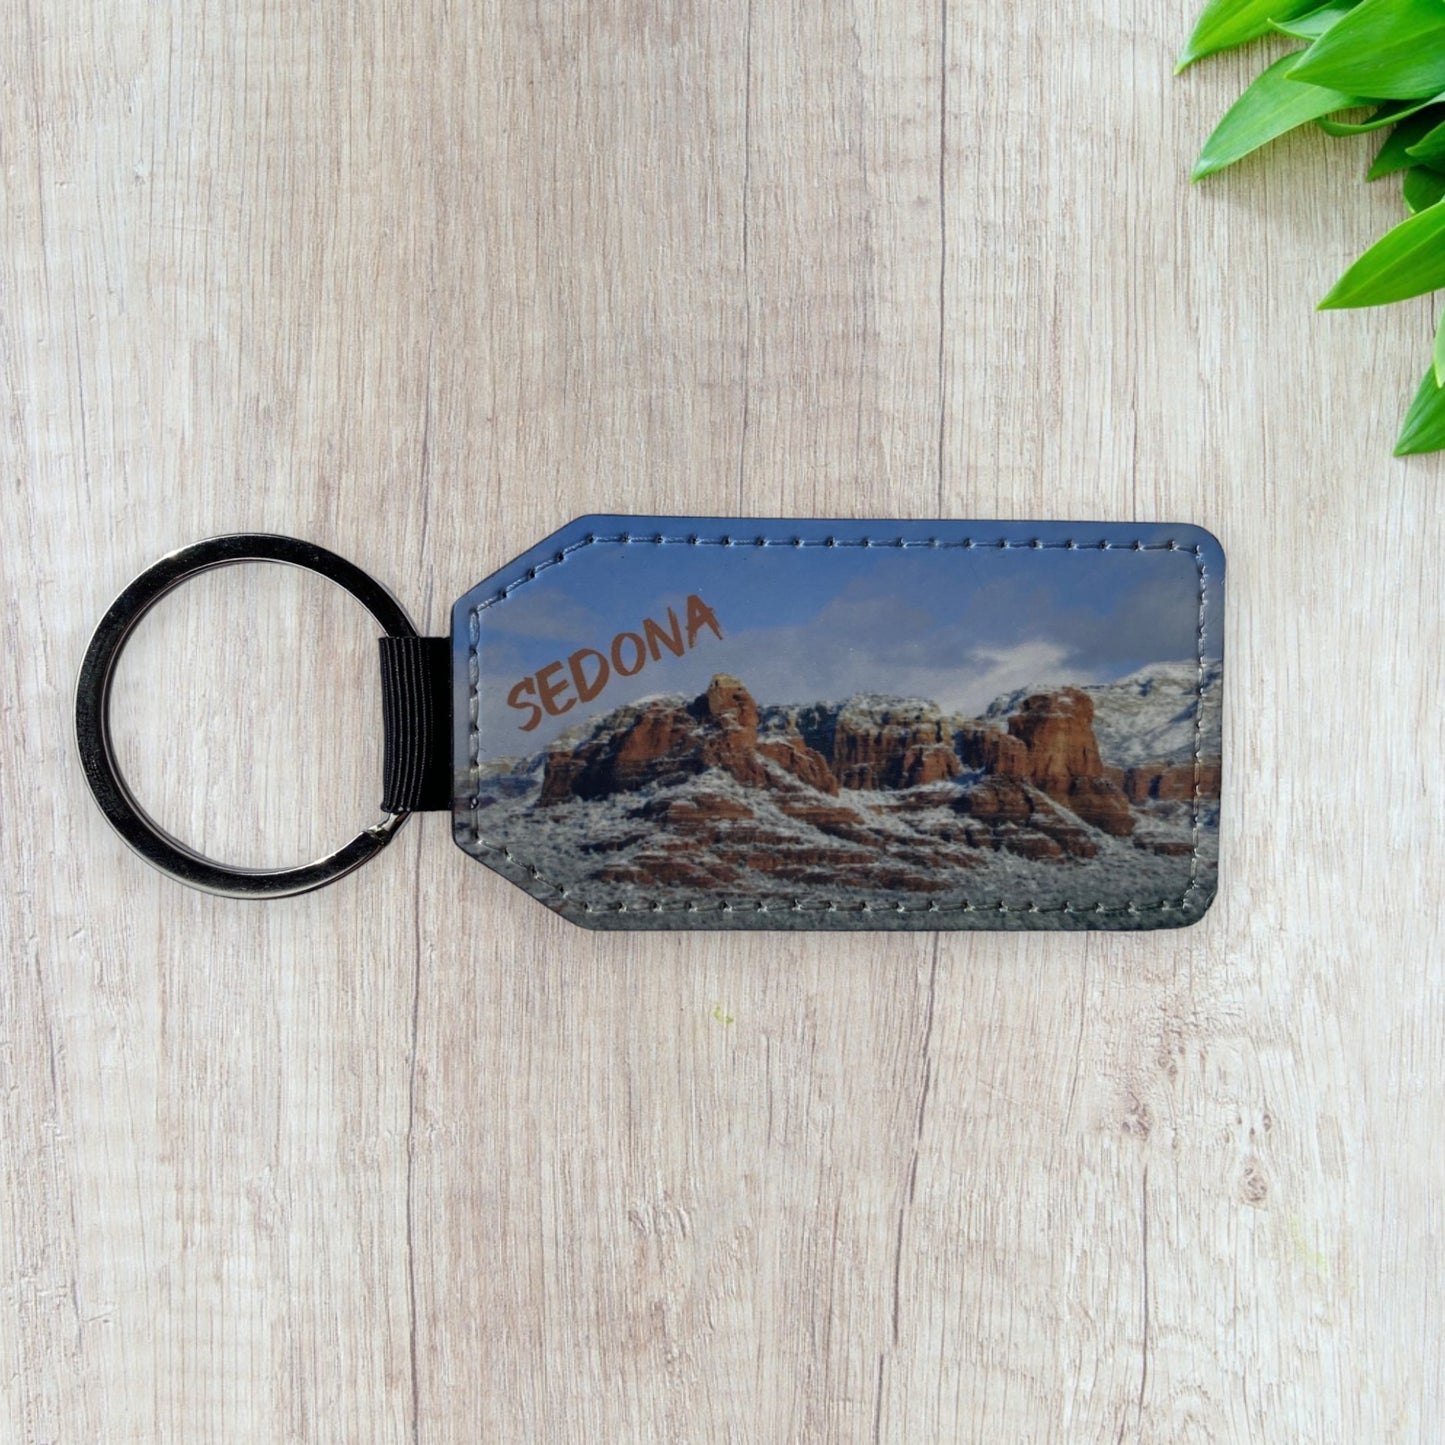 Keychain with Sweeping views of Sedonas Majestic Red Rocks covered in snow